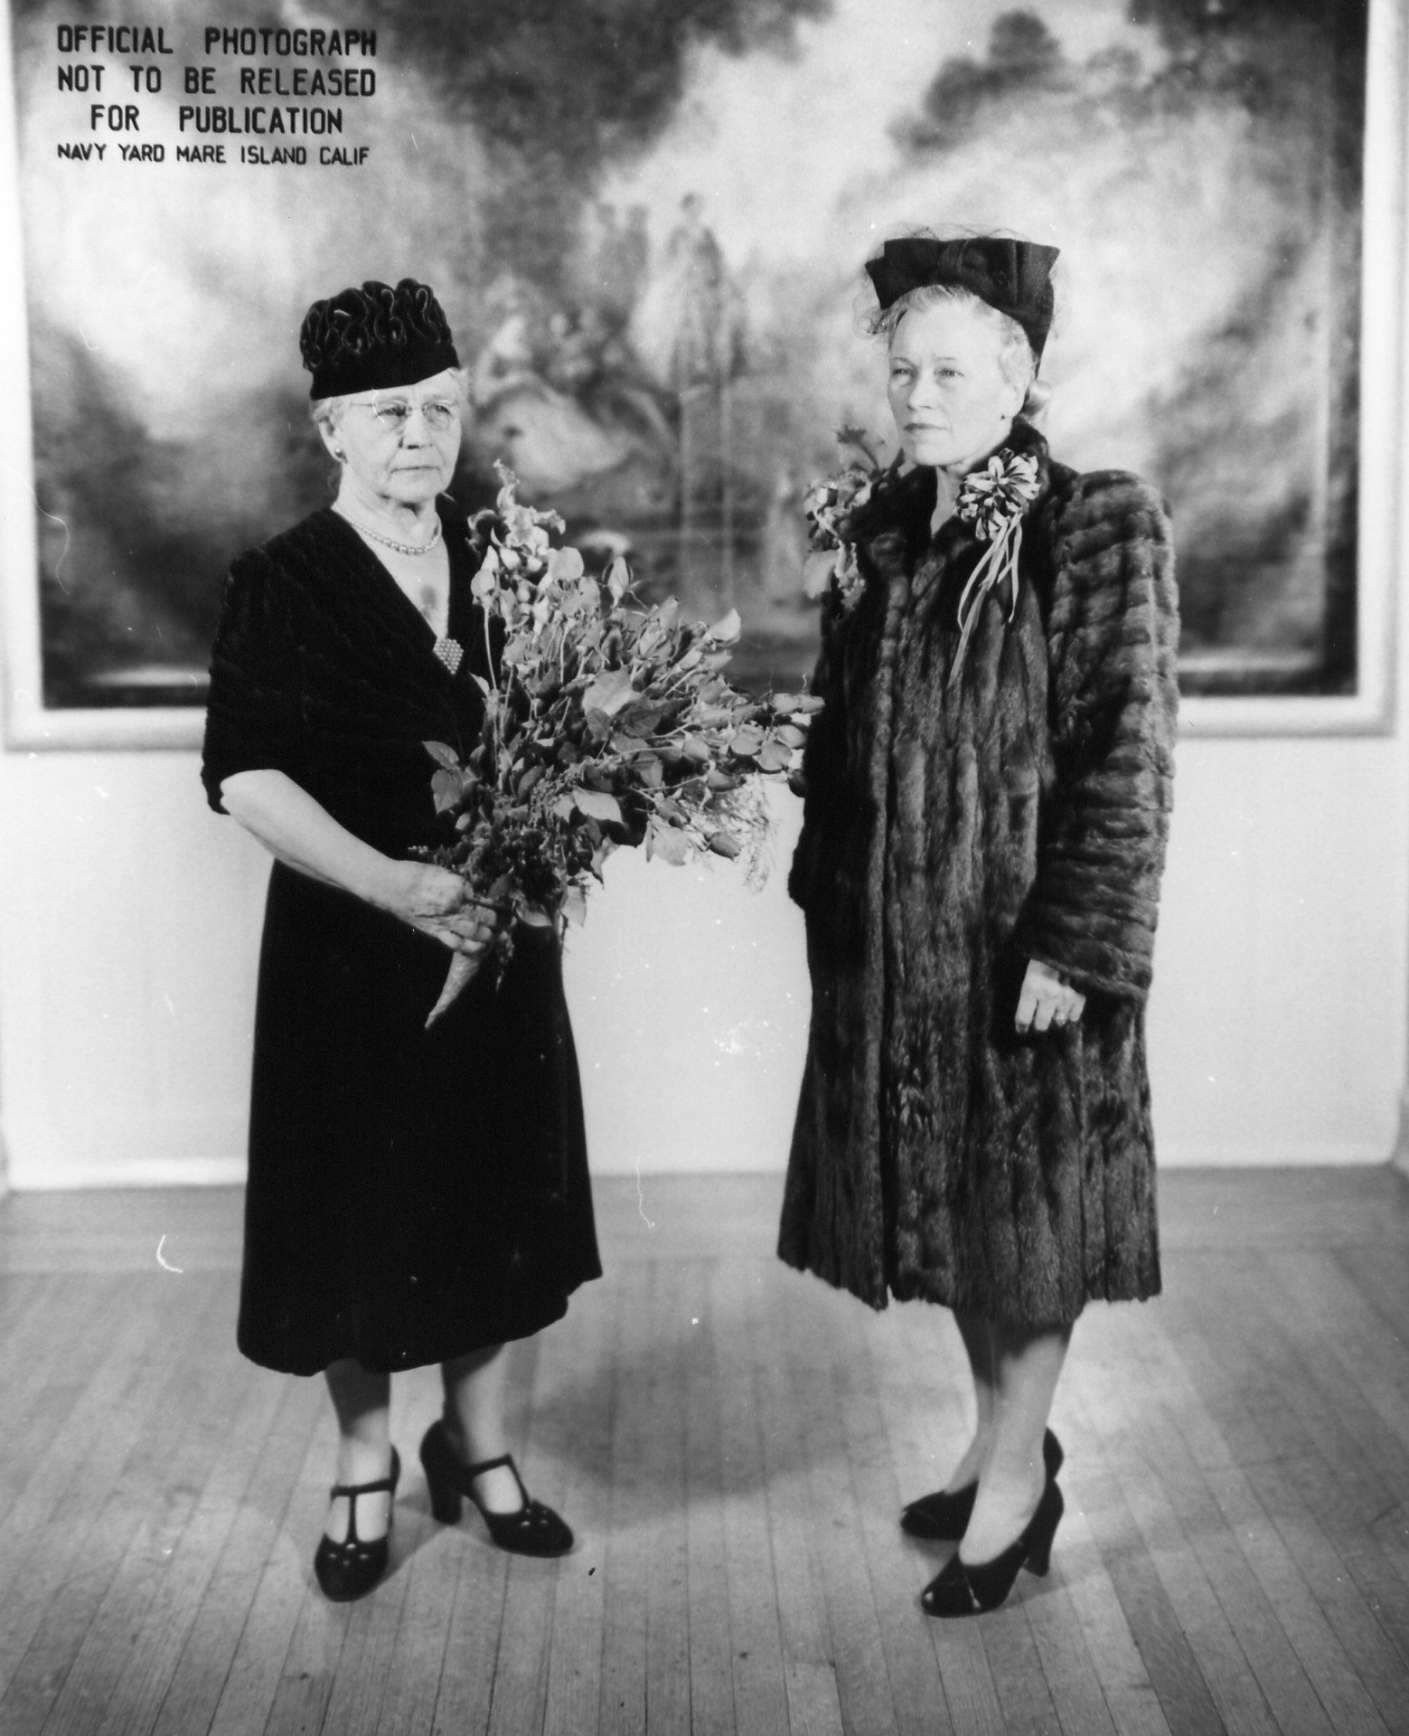 Matron of Honor Mrs. A. F. Huntington and Sponsor Mrs. William C. Baker after the launching ceremony of Wahoo, Mare Island Navy Yard, Vallejo, California, United States, 14 Feb 1942